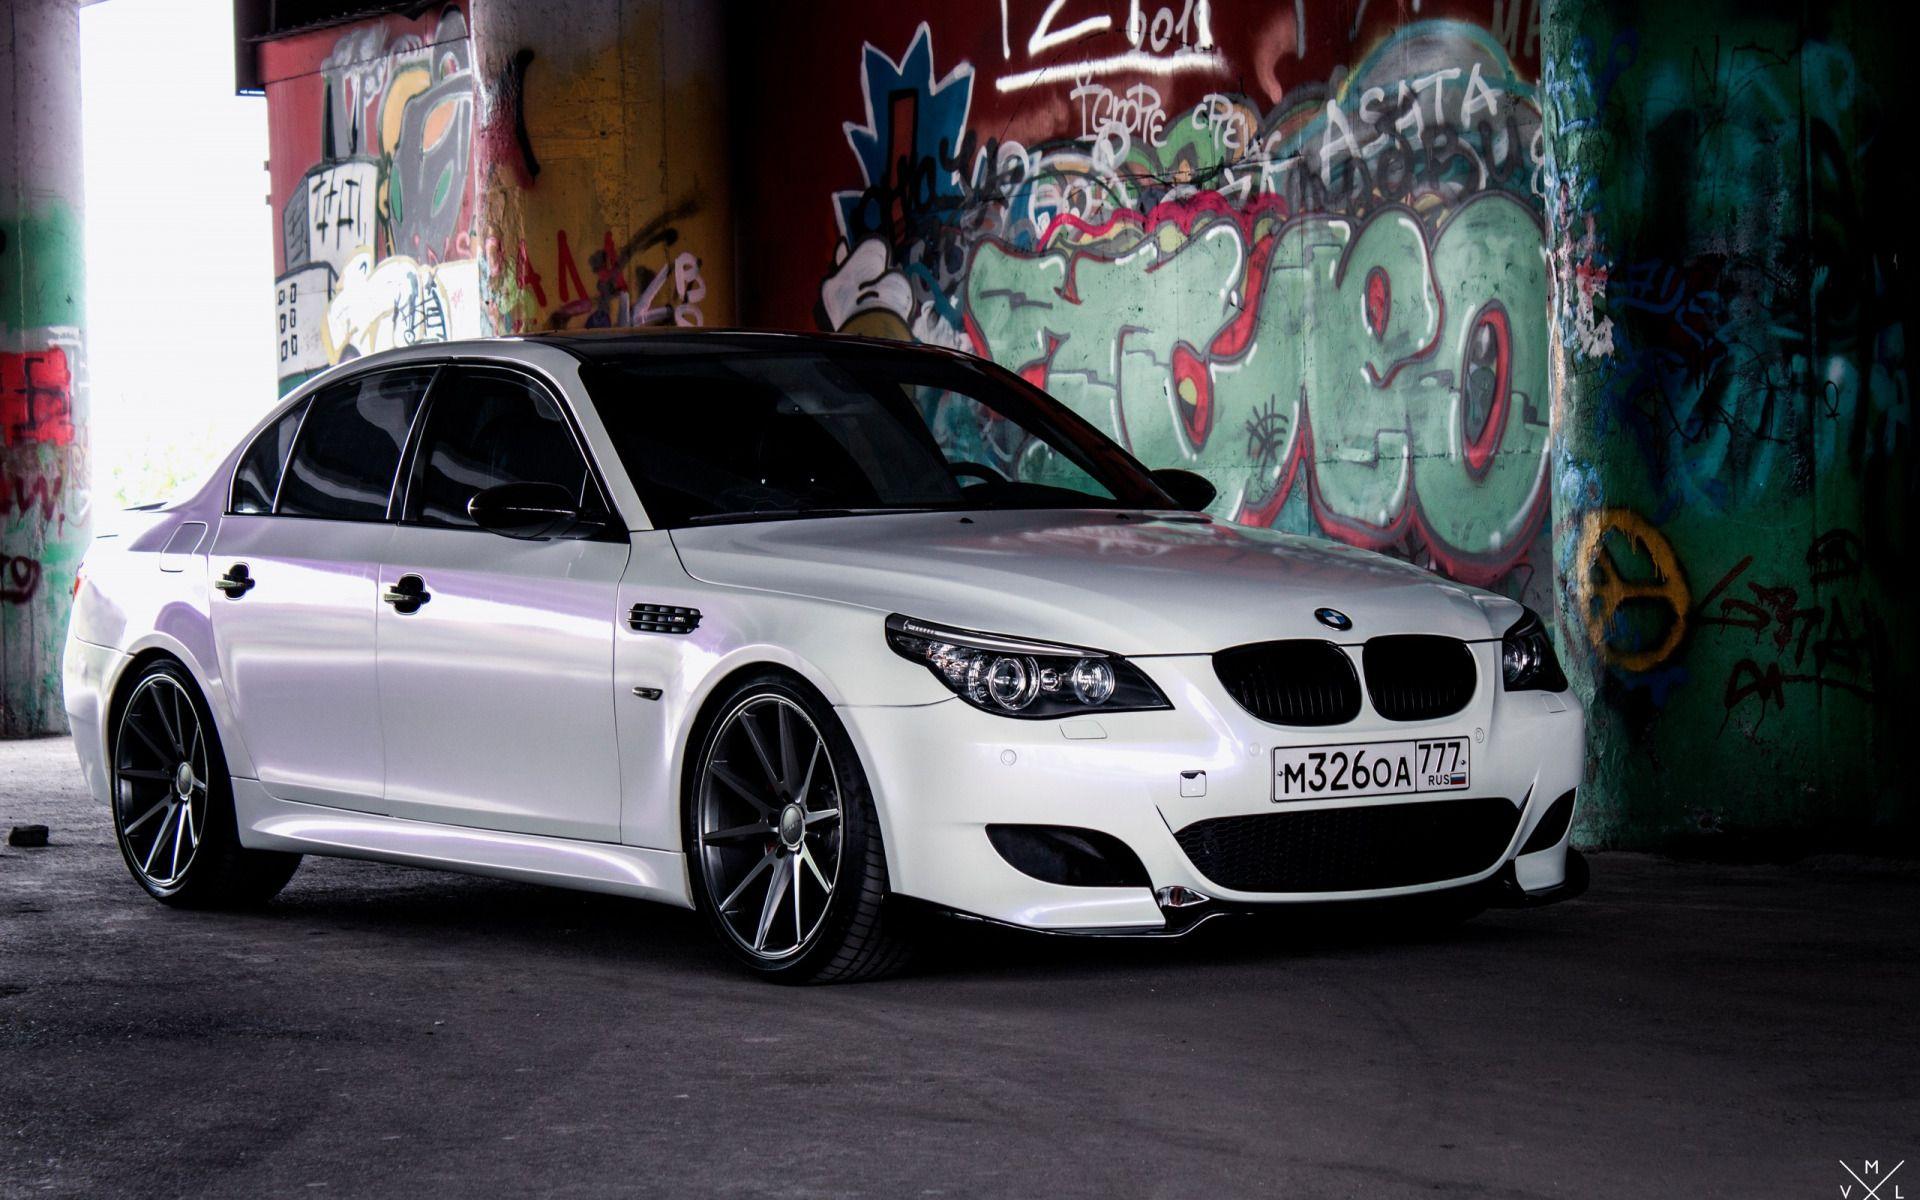 Download wallpapers BMW, E60, m5, section bmw in resolution